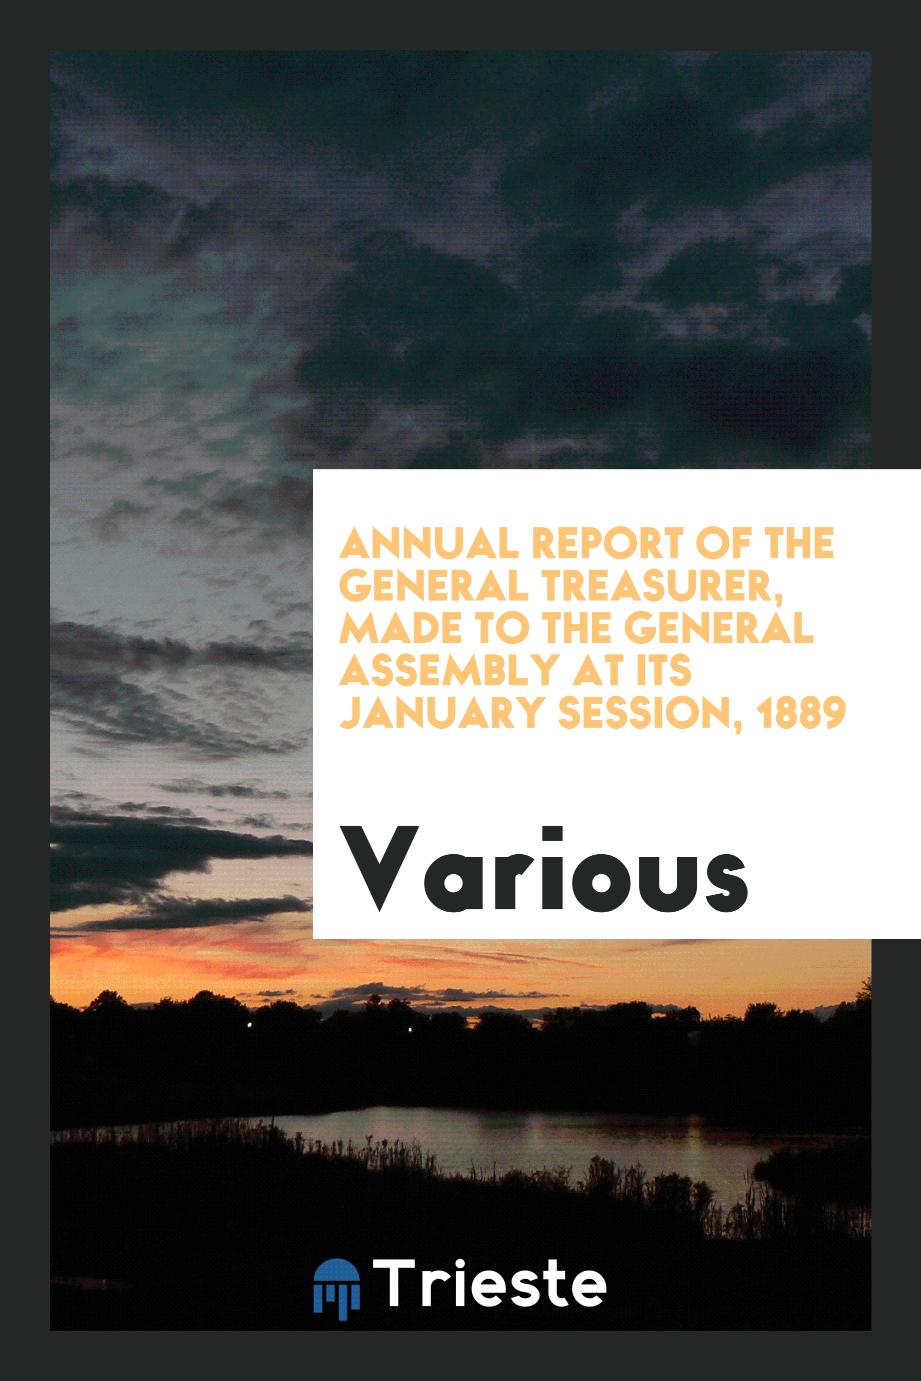 Annual Report of the General Treasurer, Made to the General Assembly at its January session, 1889